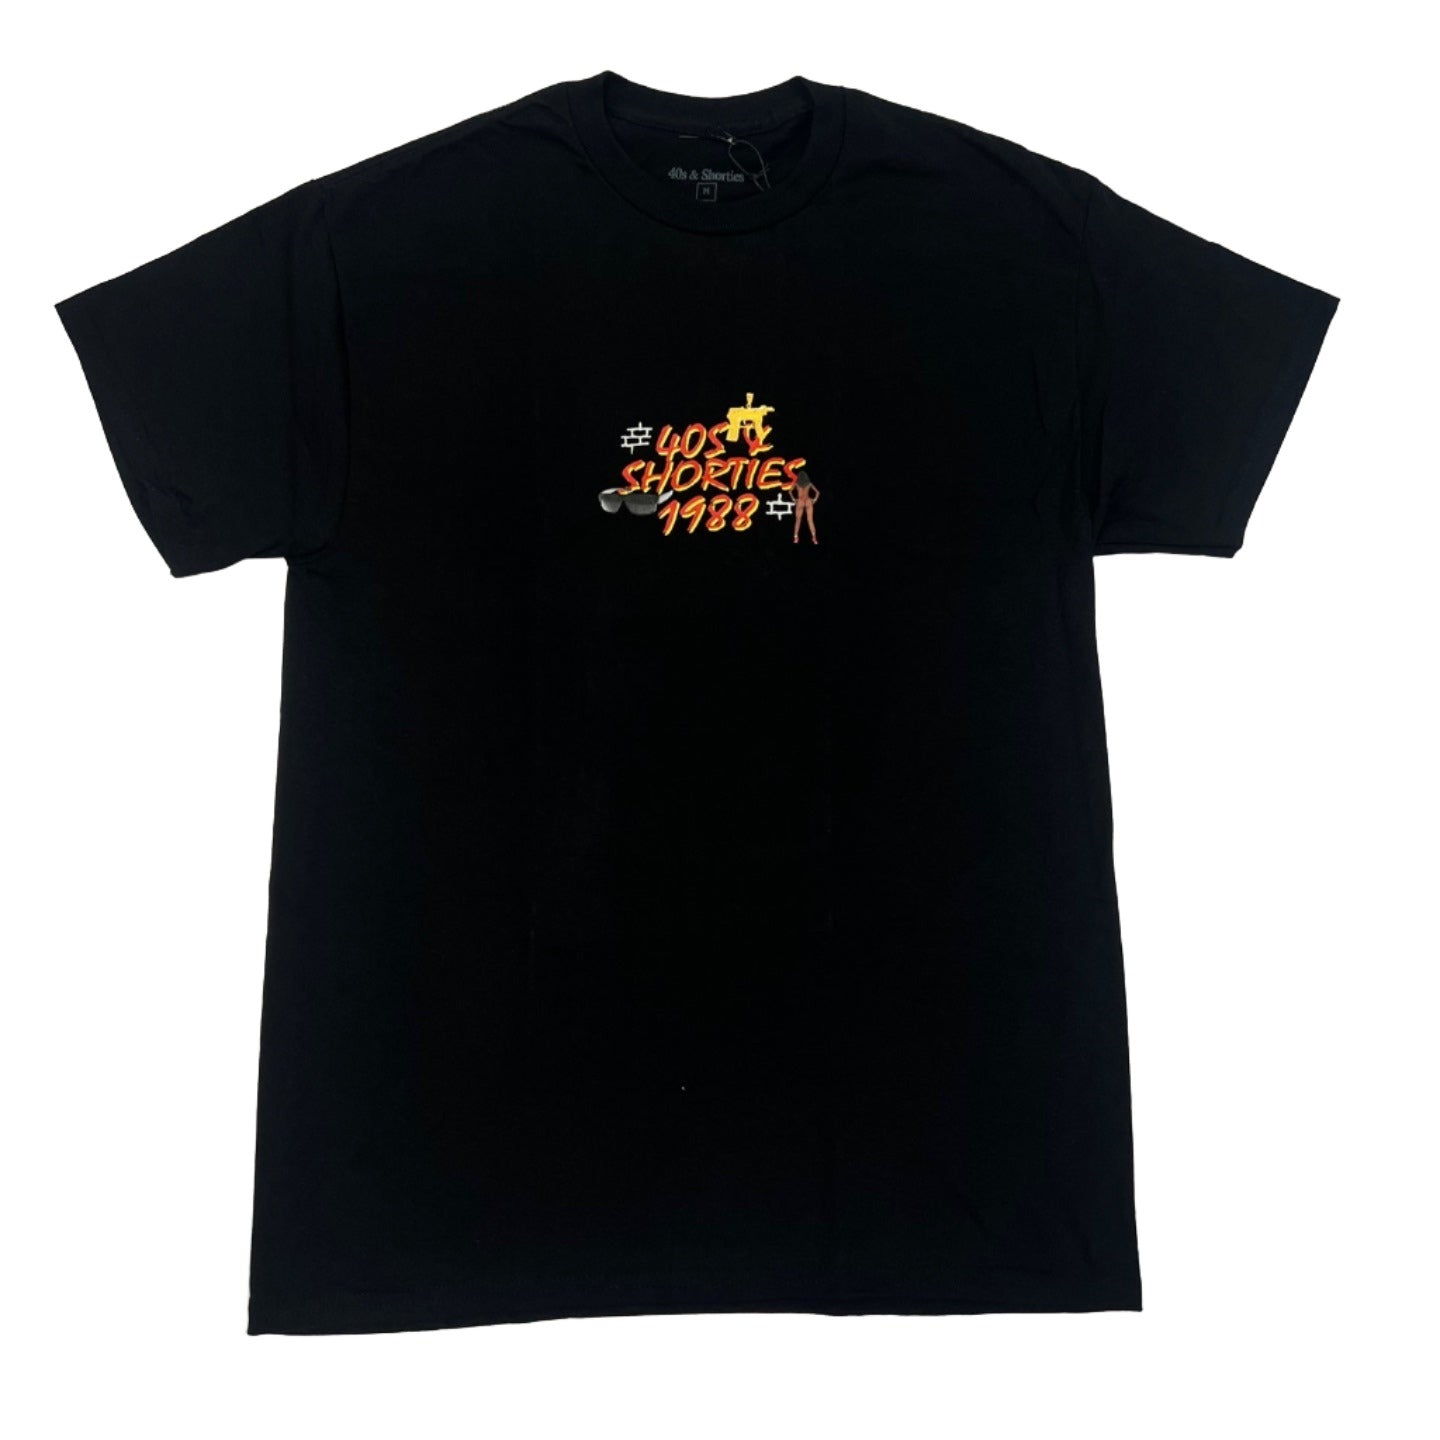 40S AND SHORTIES 1988TOUR Graphic T-Shirt